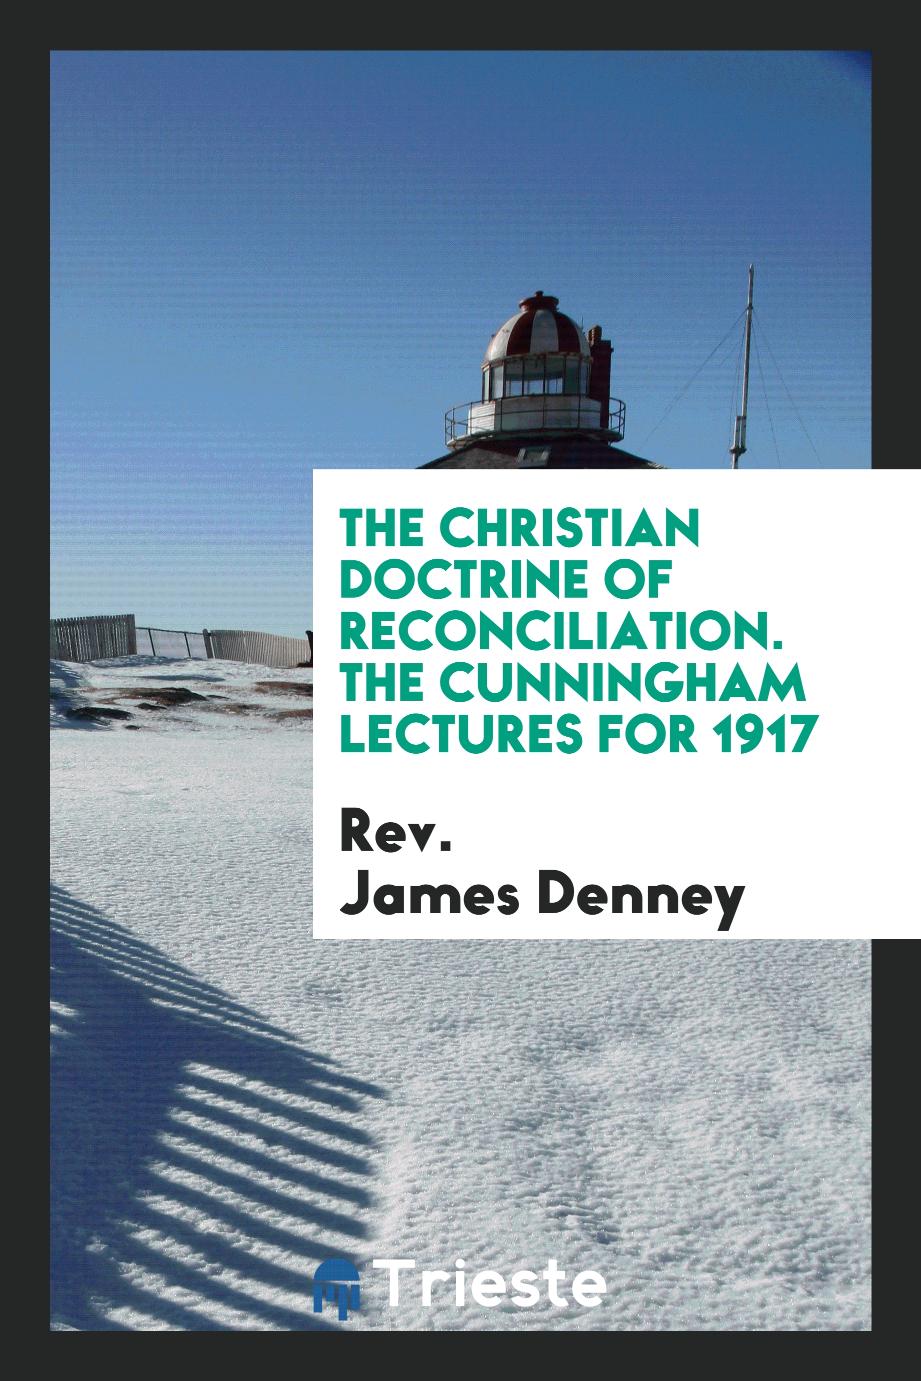 The Christian Doctrine of Reconciliation. The Cunningham Lectures for 1917